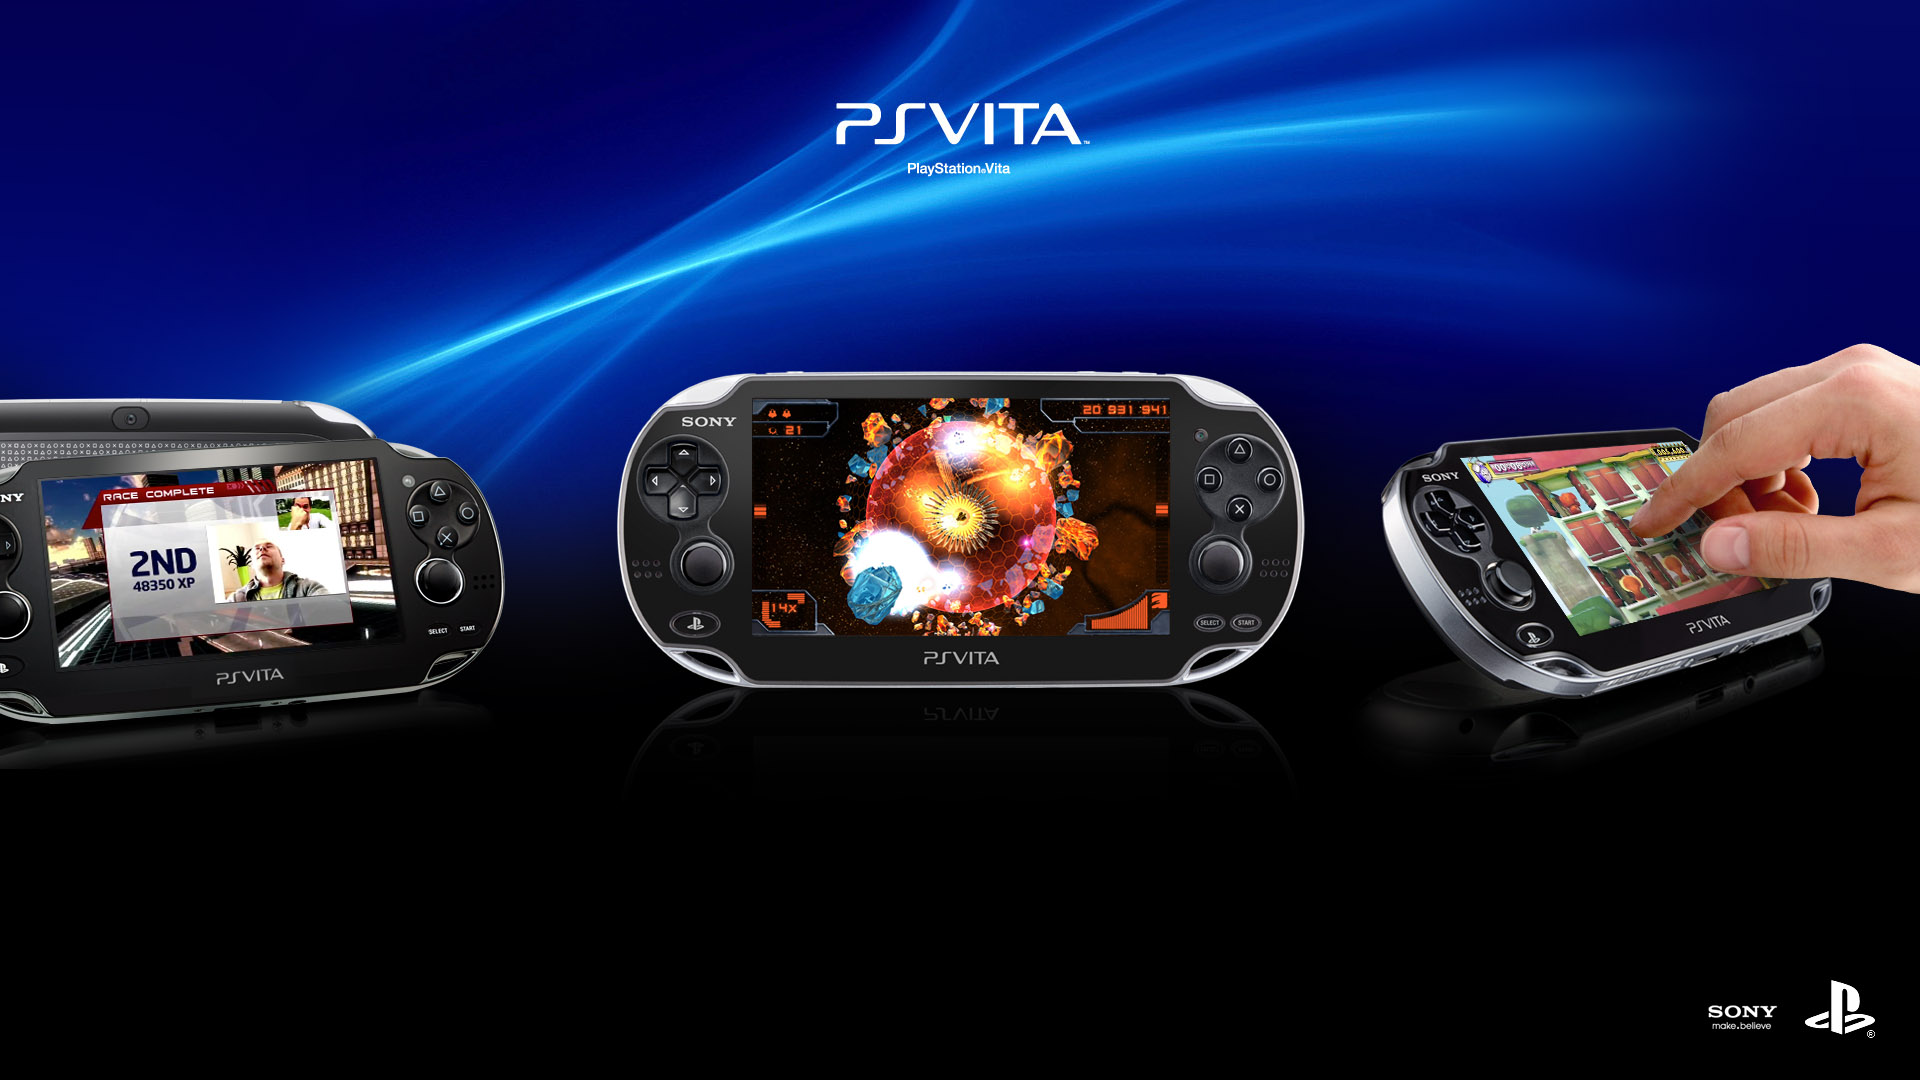 ps vita backgrounds wallpaper cave on ps vita background